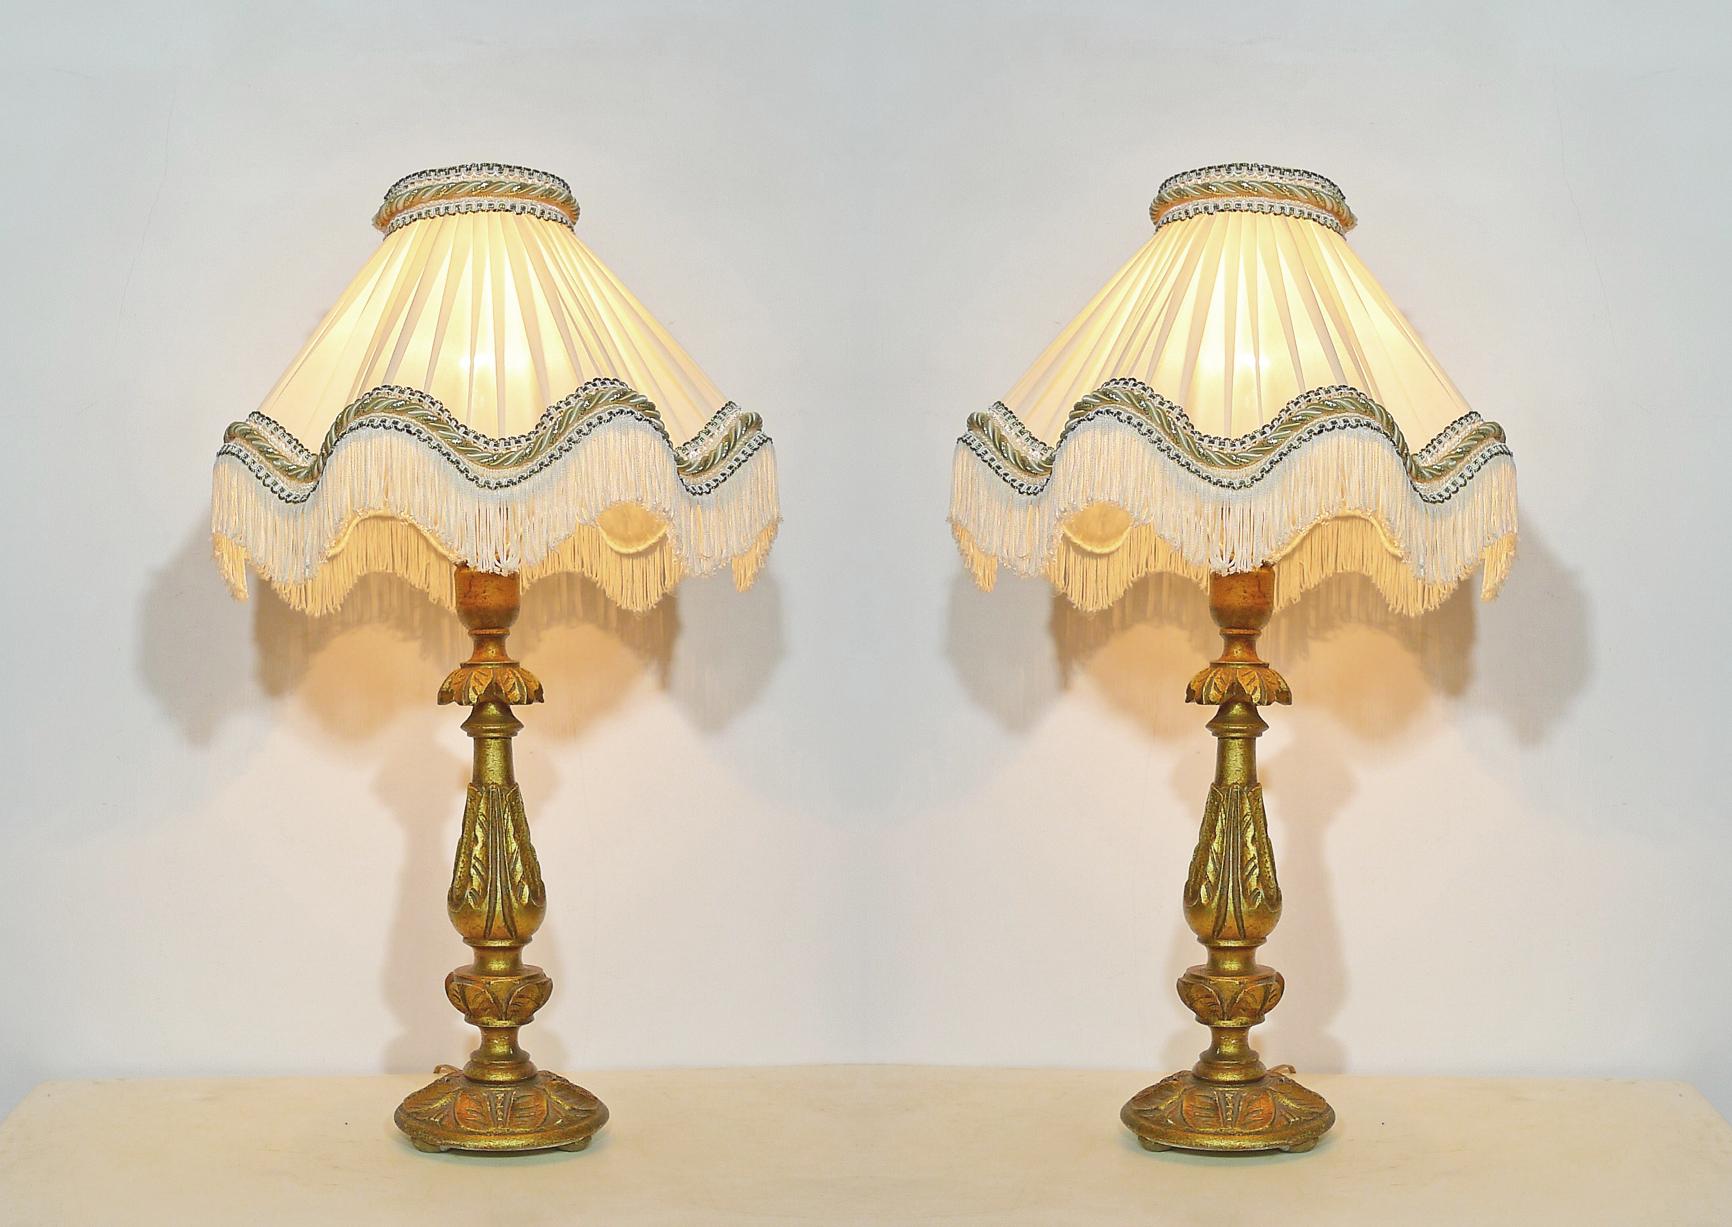 Pair of Italian Baroque Carved Giltwood Candlesticks Torchères Ivory Table Lamps (Italienisch)